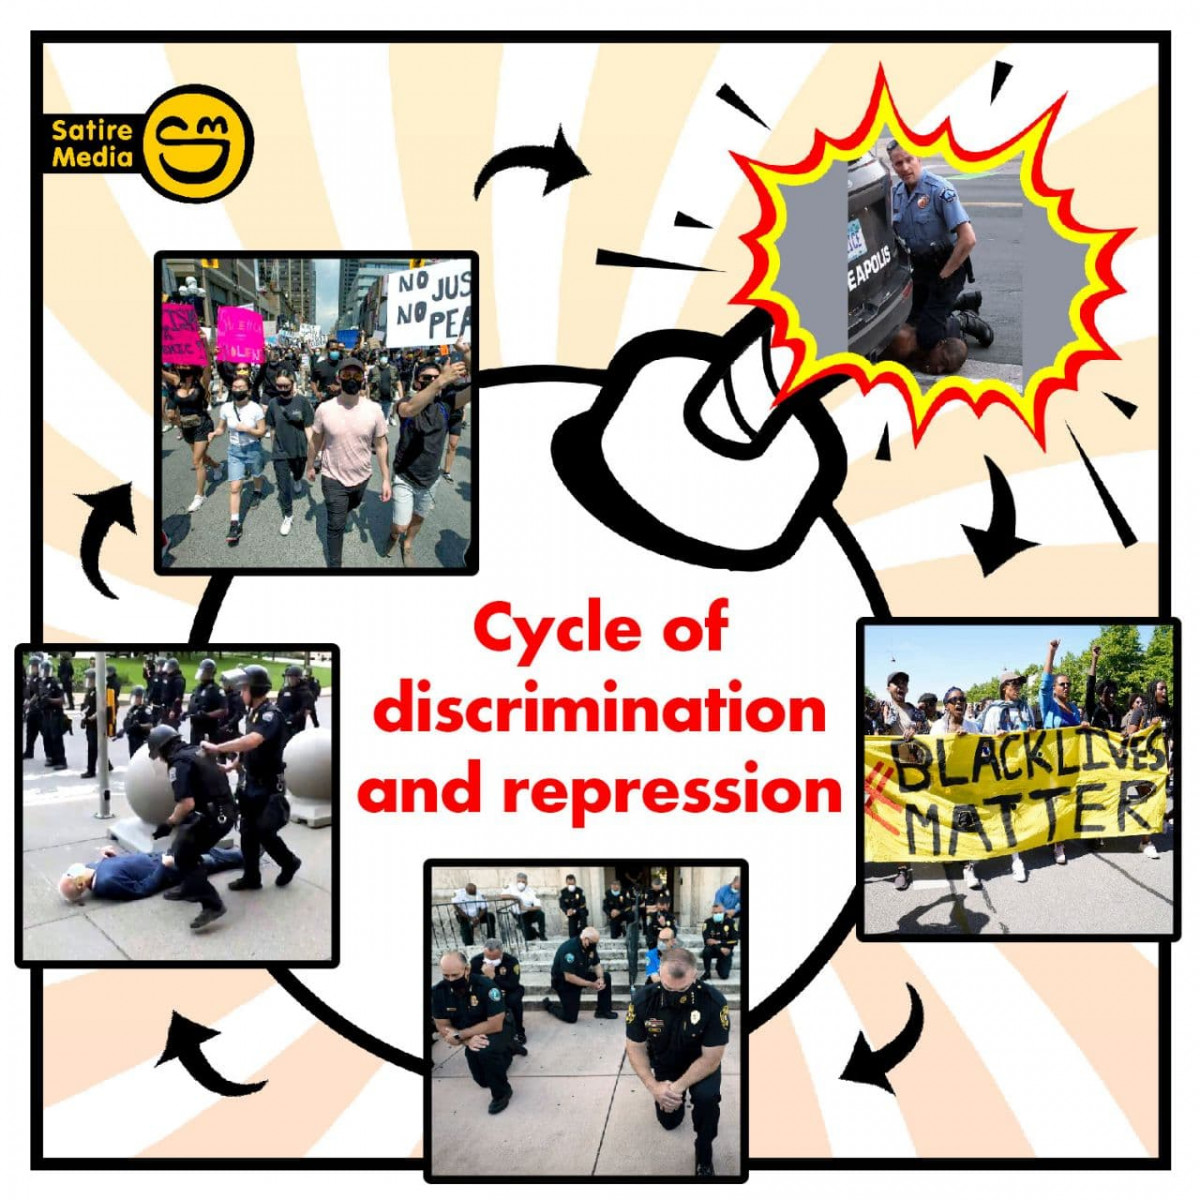 Cycle of discrimination and repression